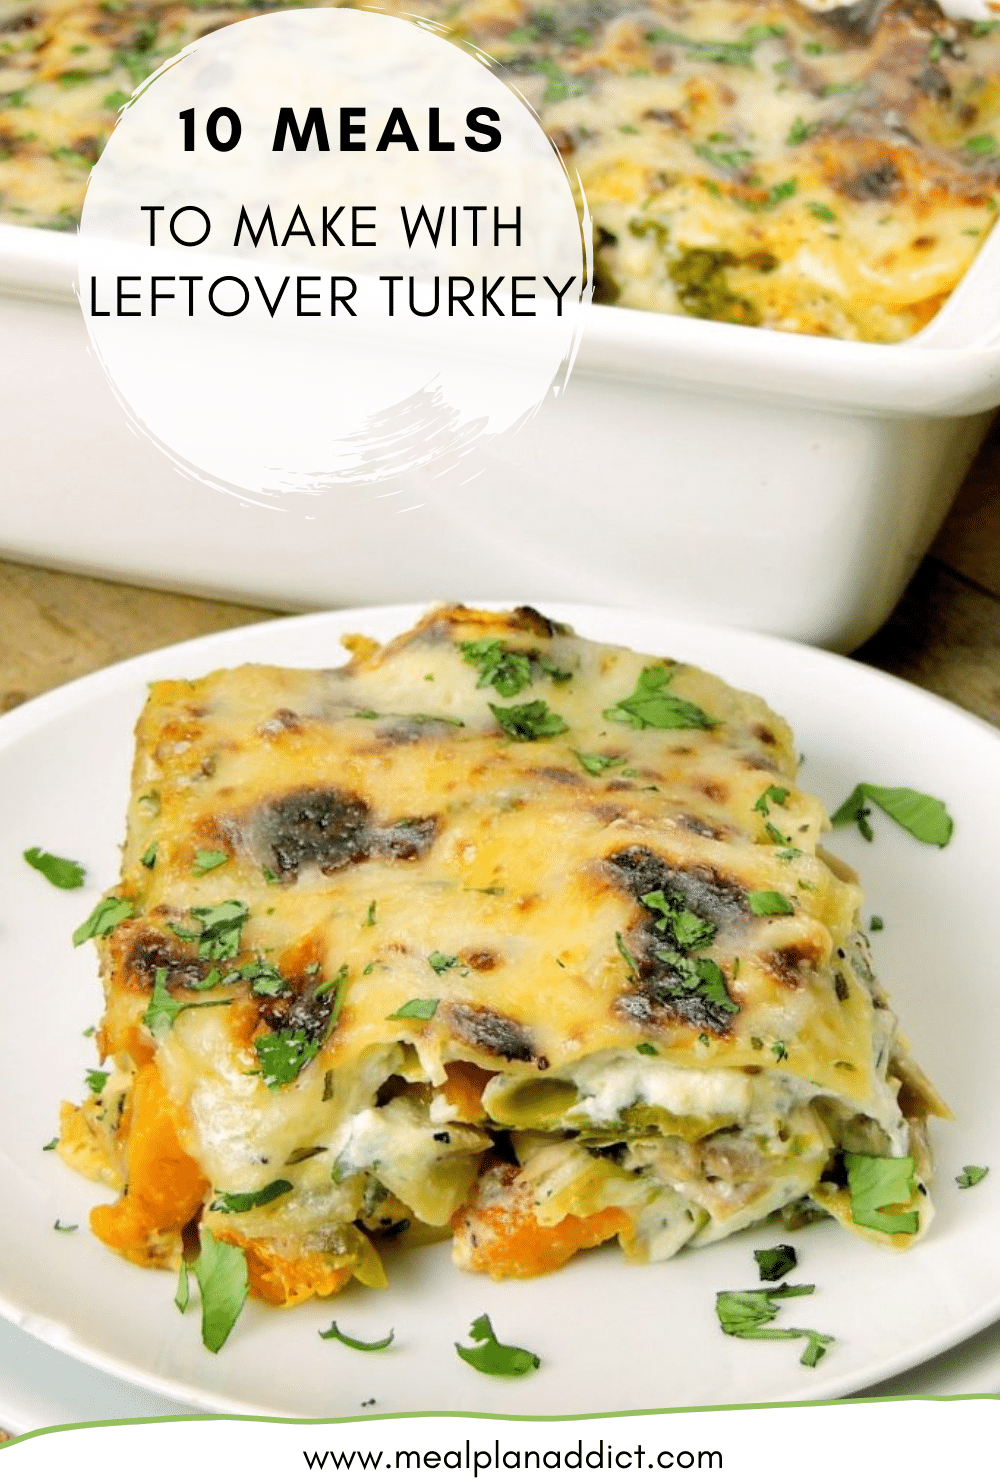 10 meals to make with leftover turkey